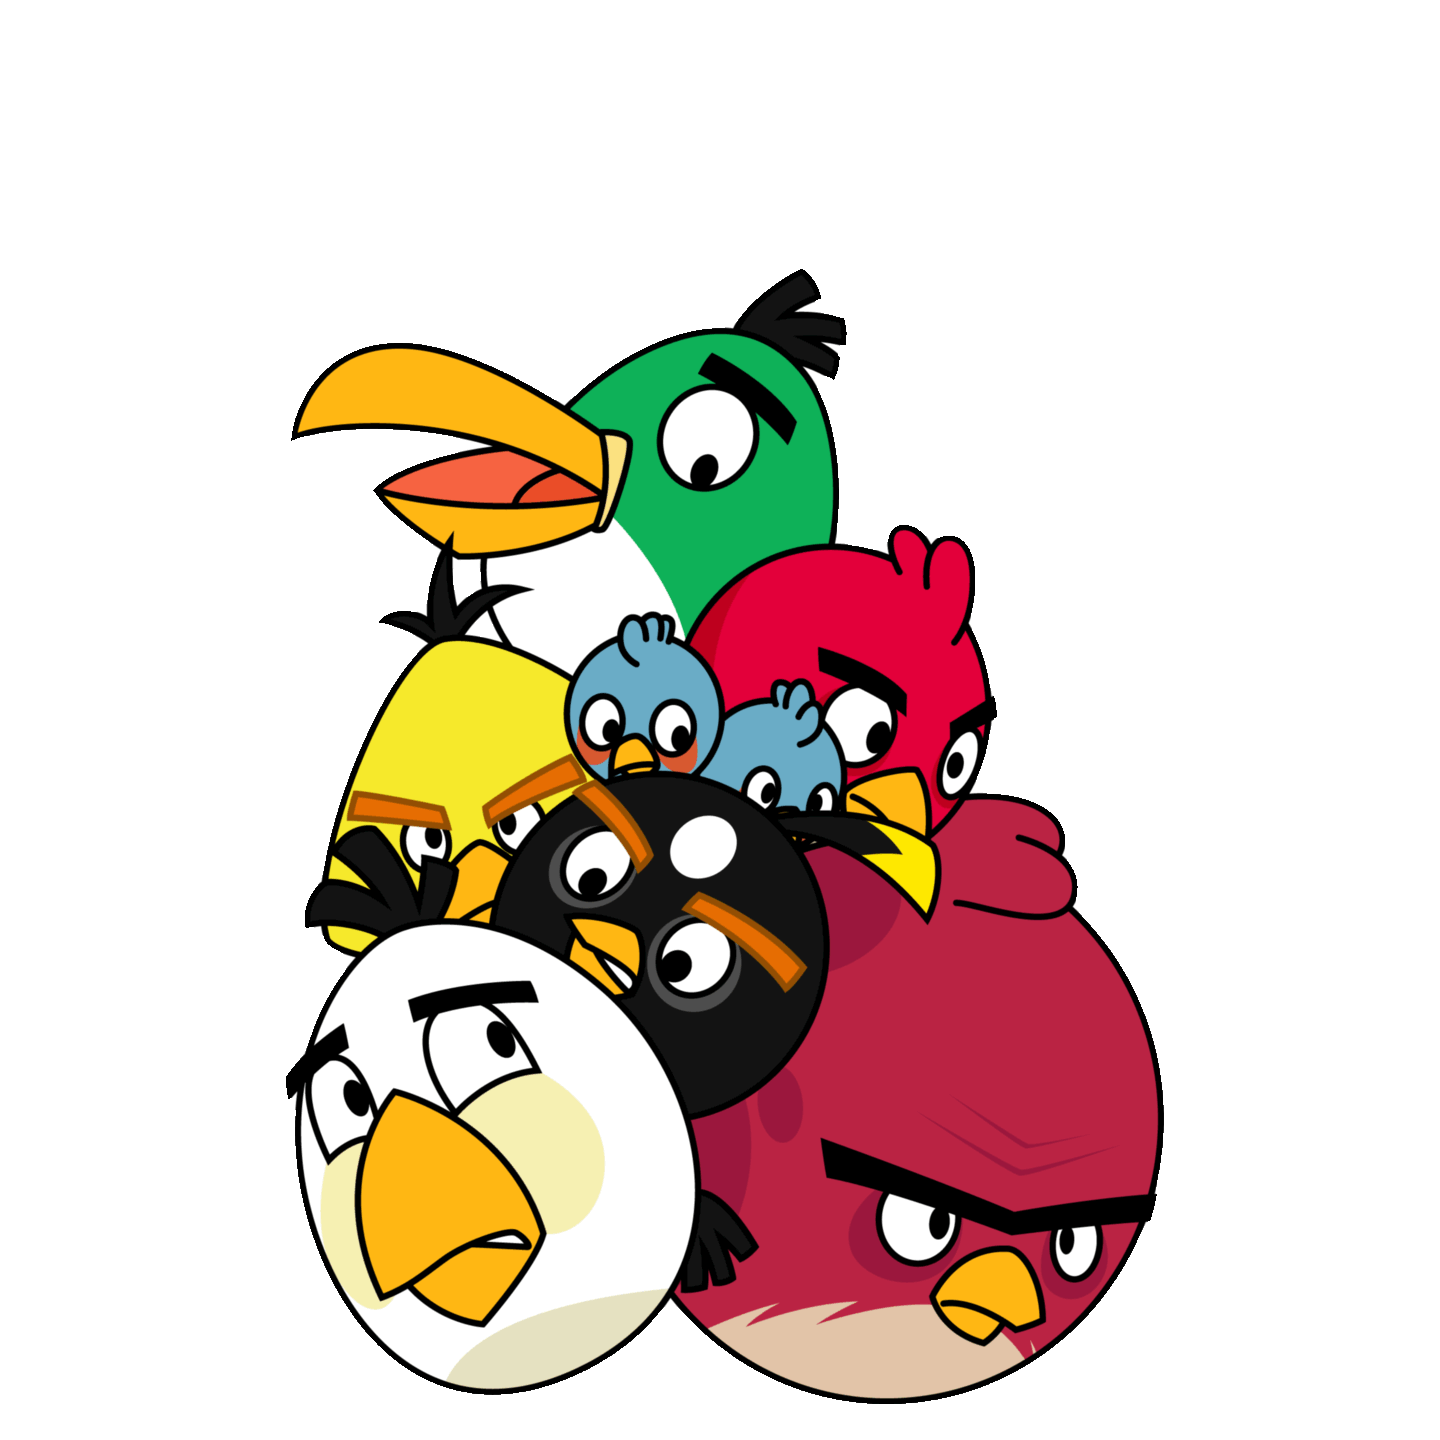 Angry Birds Animation Sticker by imoji for iOS & Android GIPHY